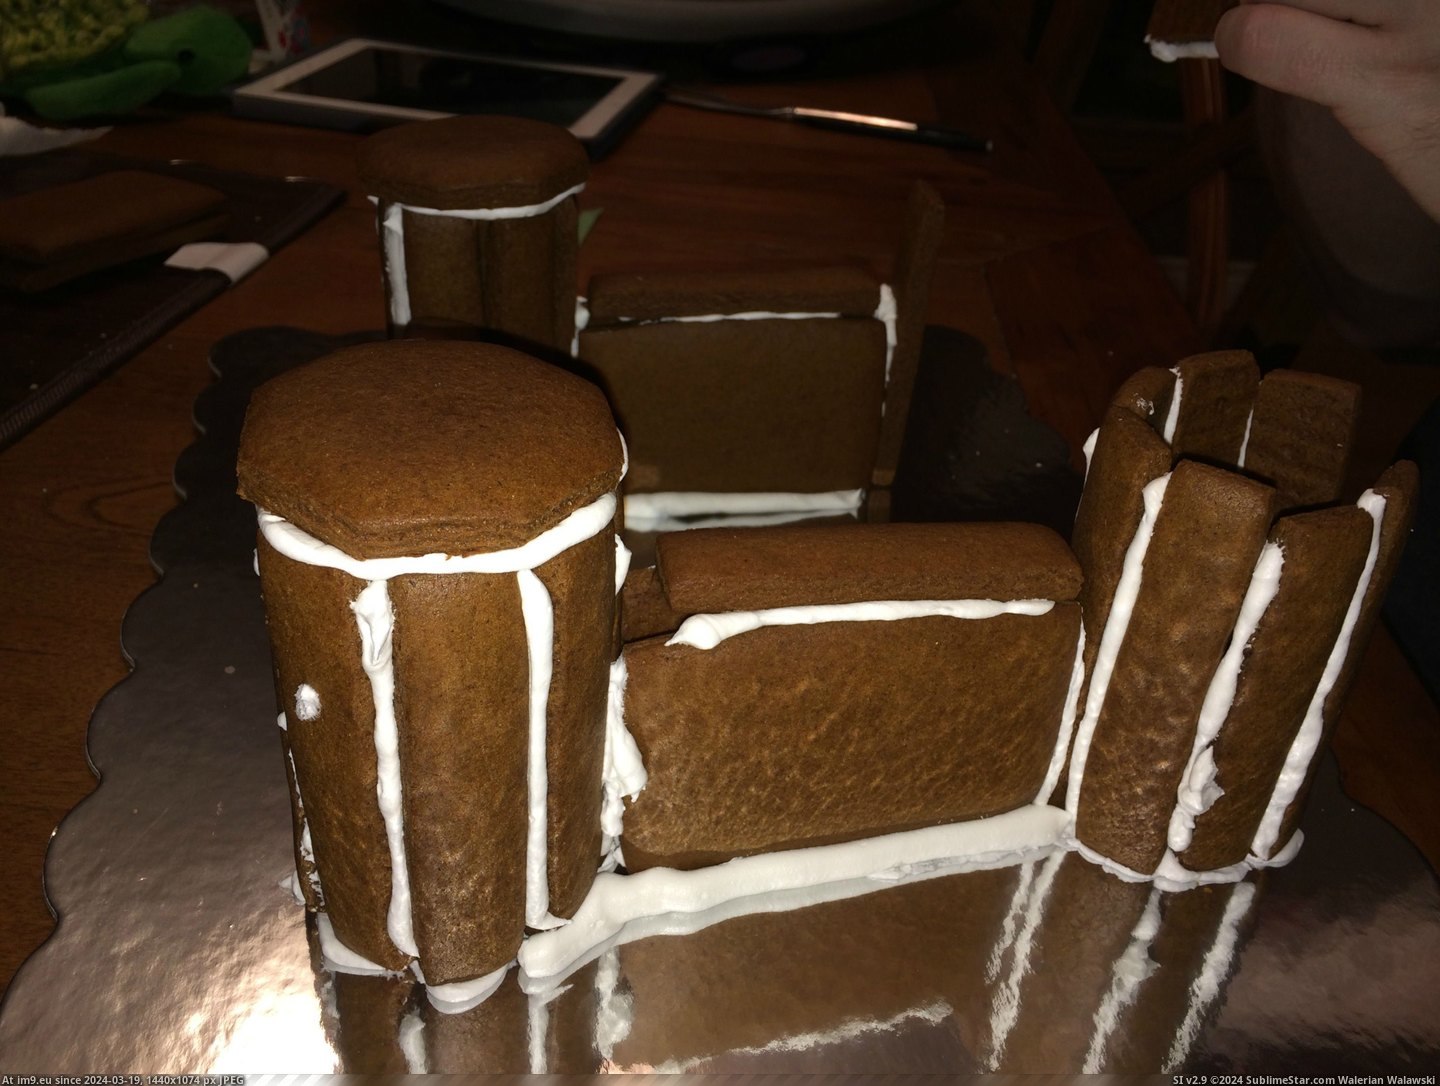 #Husband #Get #Our #Divorced #Collaborated #Project #Gingerbread #Success [Pics] My husband and I collaborated on our first gingerbread project and didn't get divorced...success! 17 Pic. (Изображение из альбом My r/PICS favs))